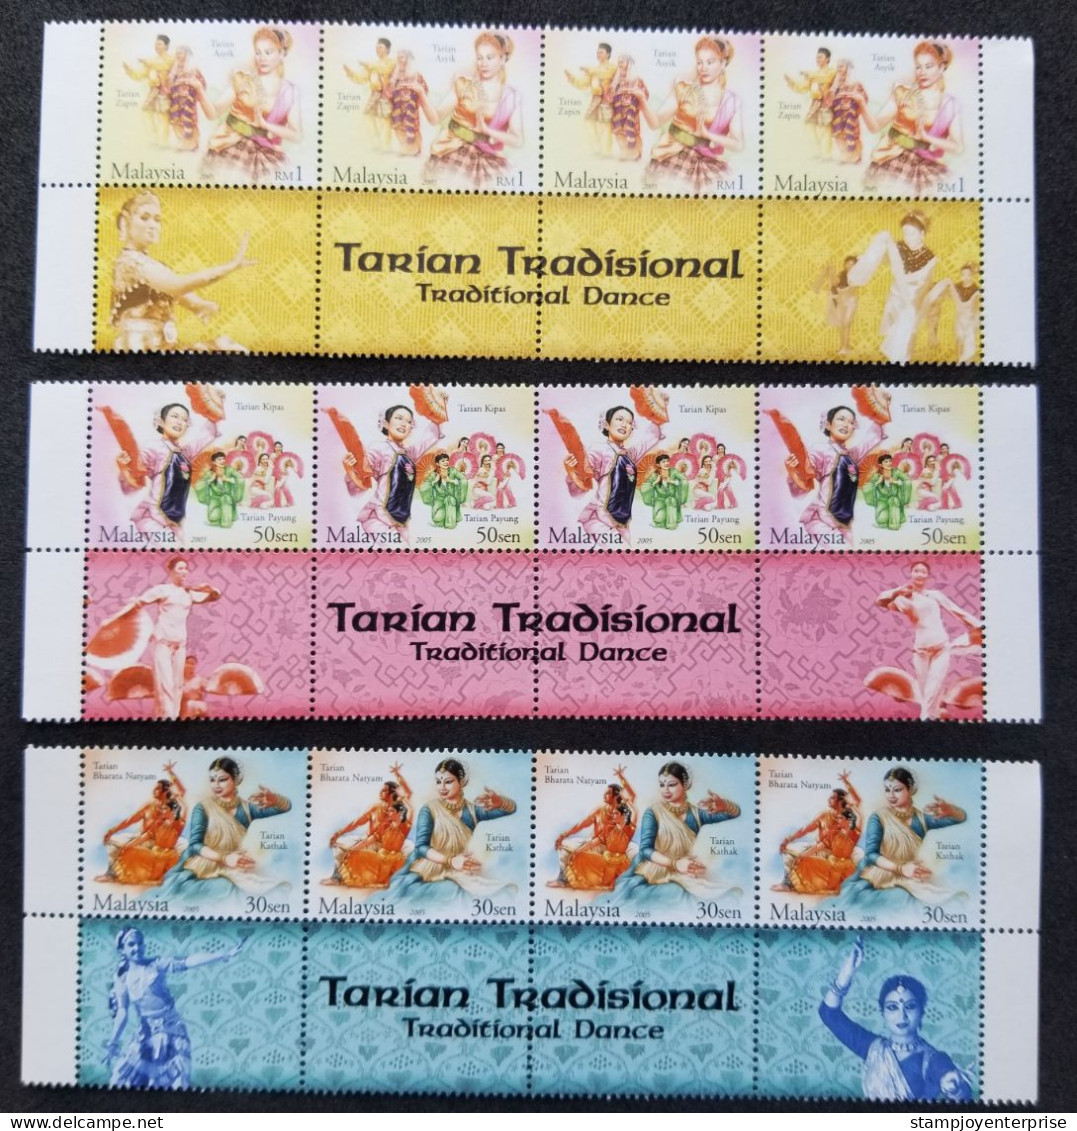 Malaysia Traditional Dance 2005 Costumes Dances Culture Attire Cloth Indian Chinese Malay Art (stamp Title) MNH - Malaysia (1964-...)